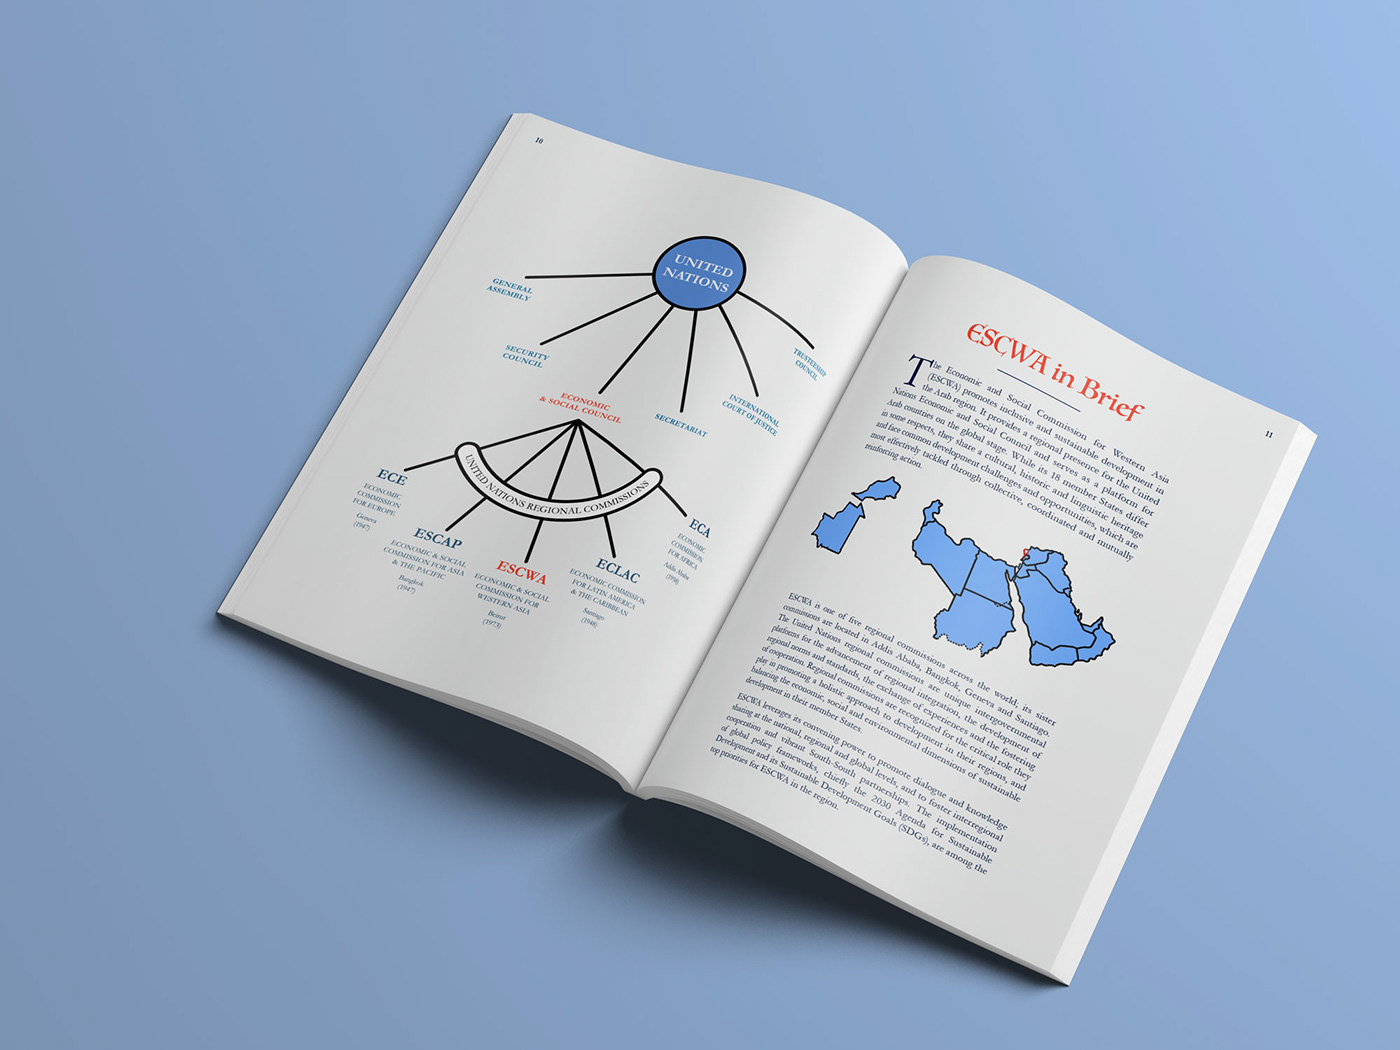 annual report escwa ILLUSTRATION  Layout publication story storytelling   un editorial